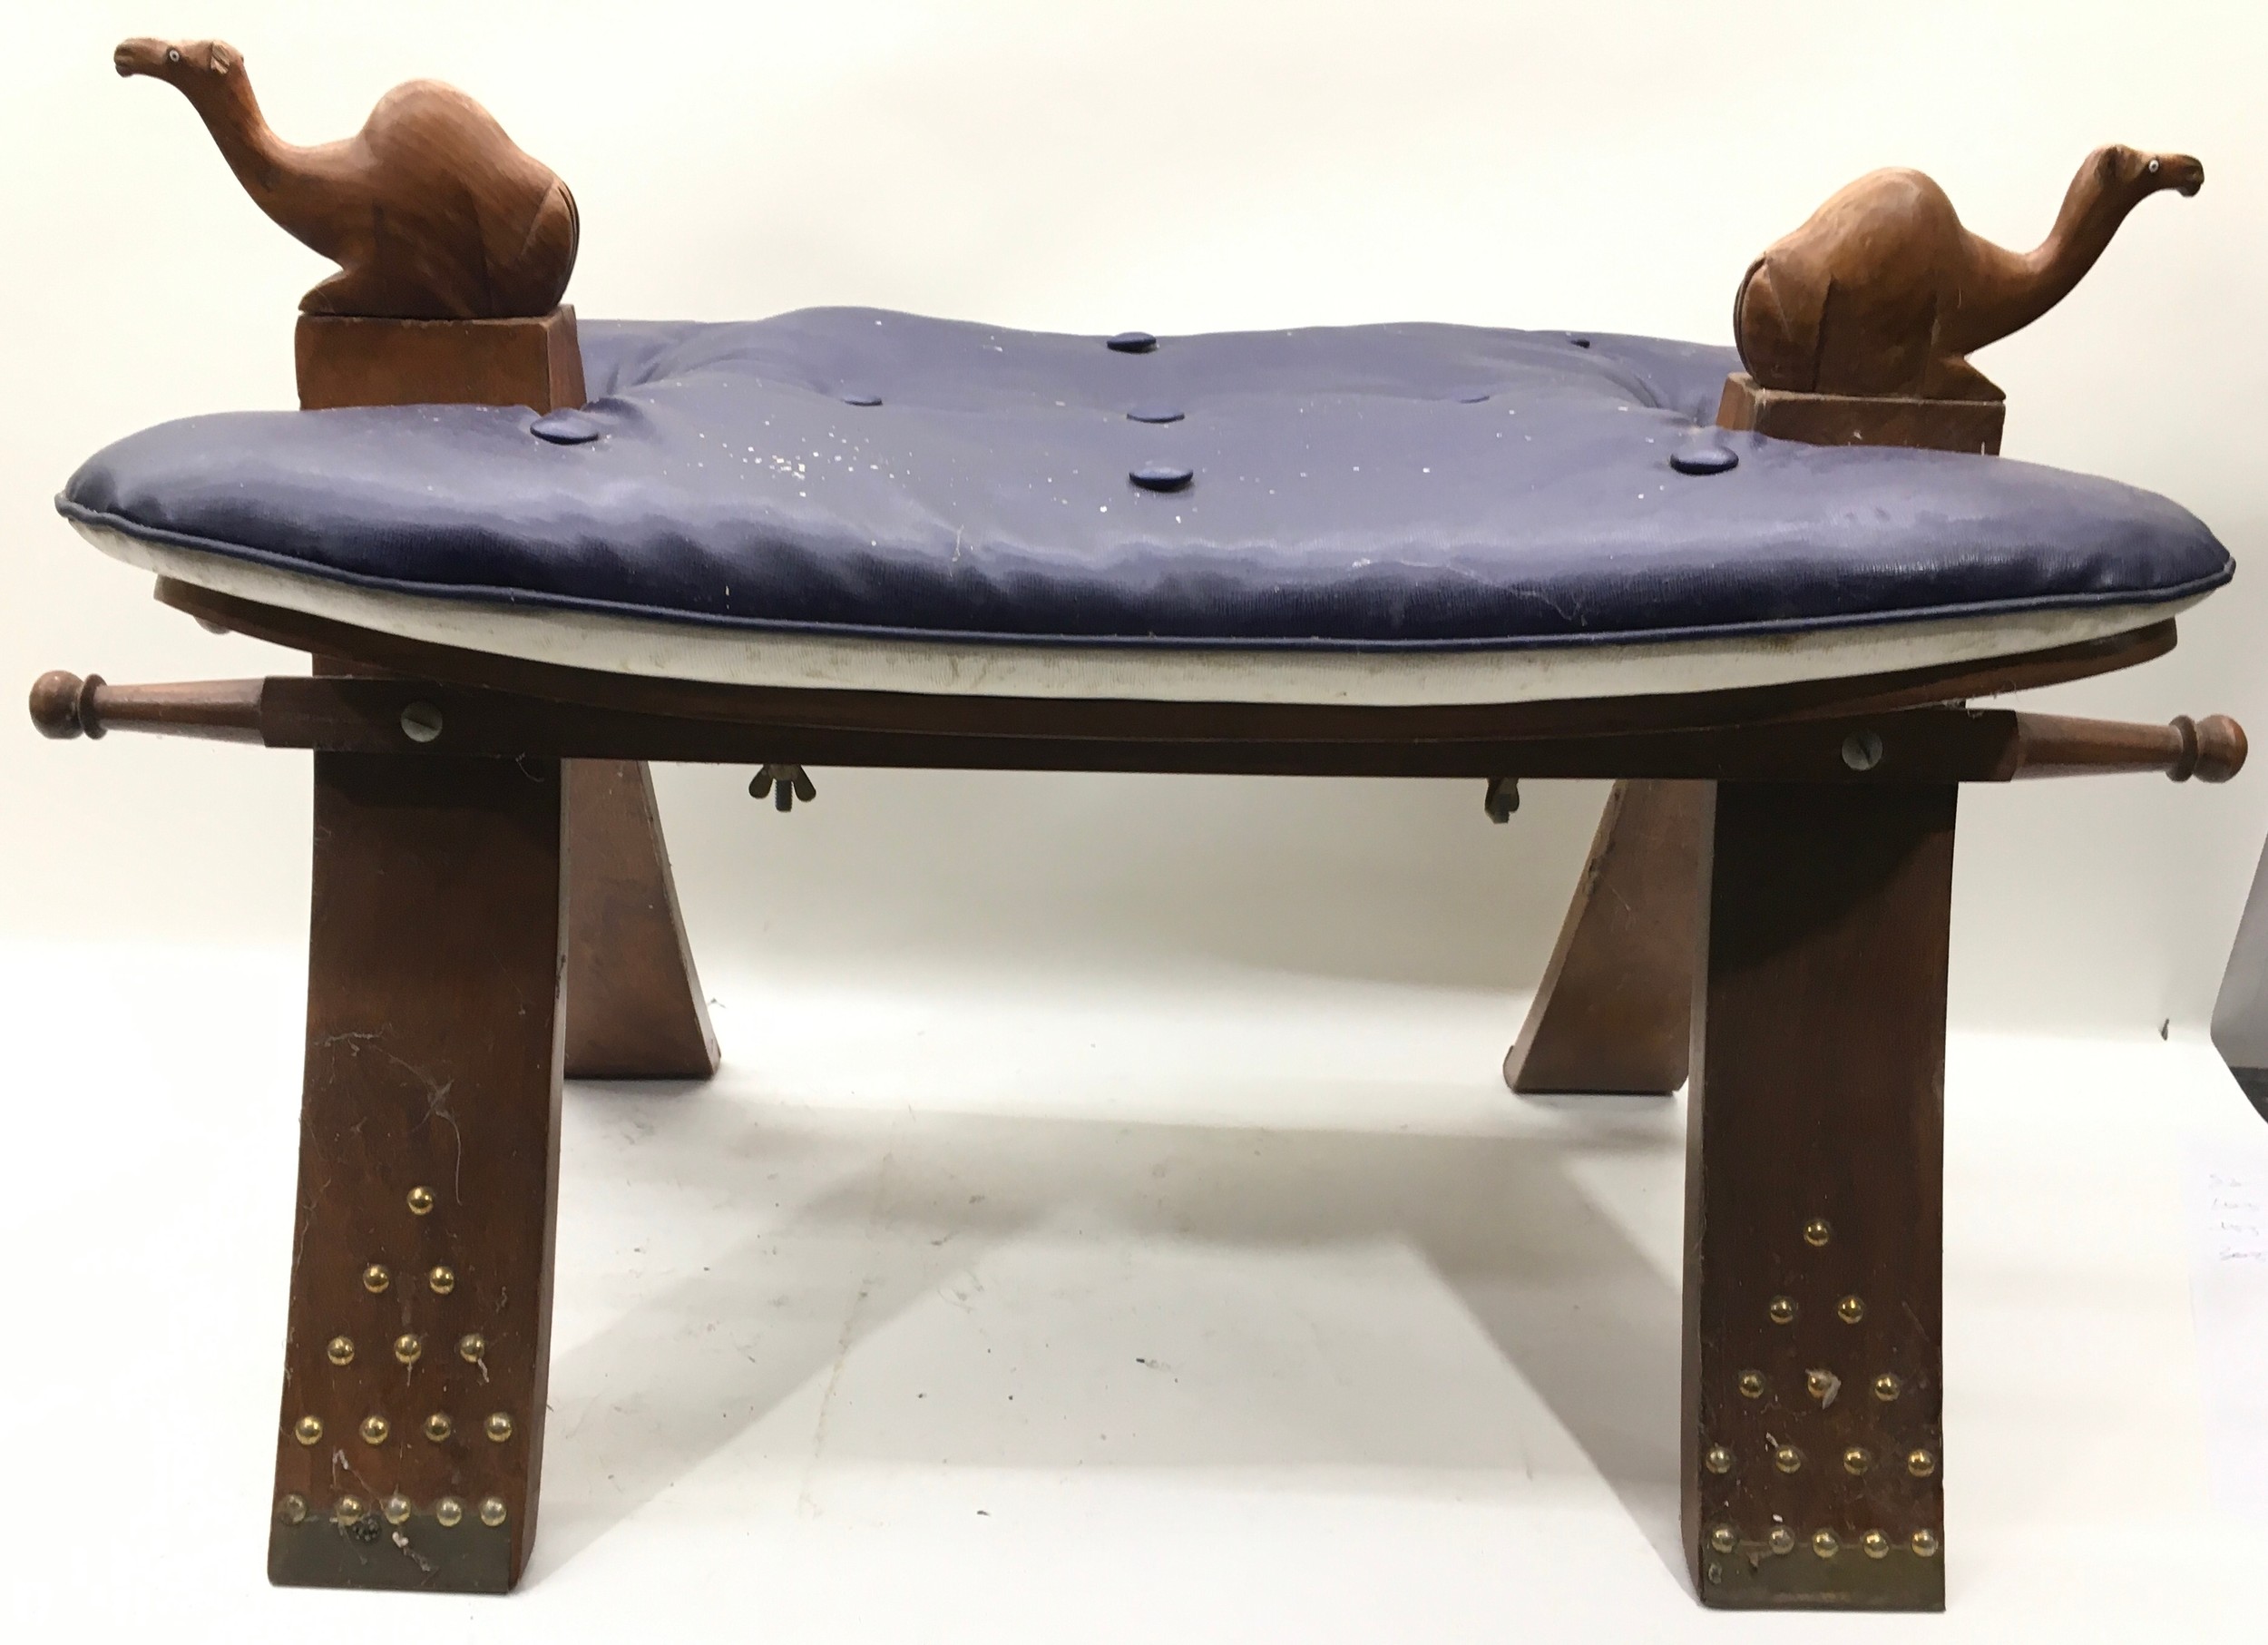 Vintage large Arabian / Middle Eastern Camel Stool. Wooden base with brass studded decoration and